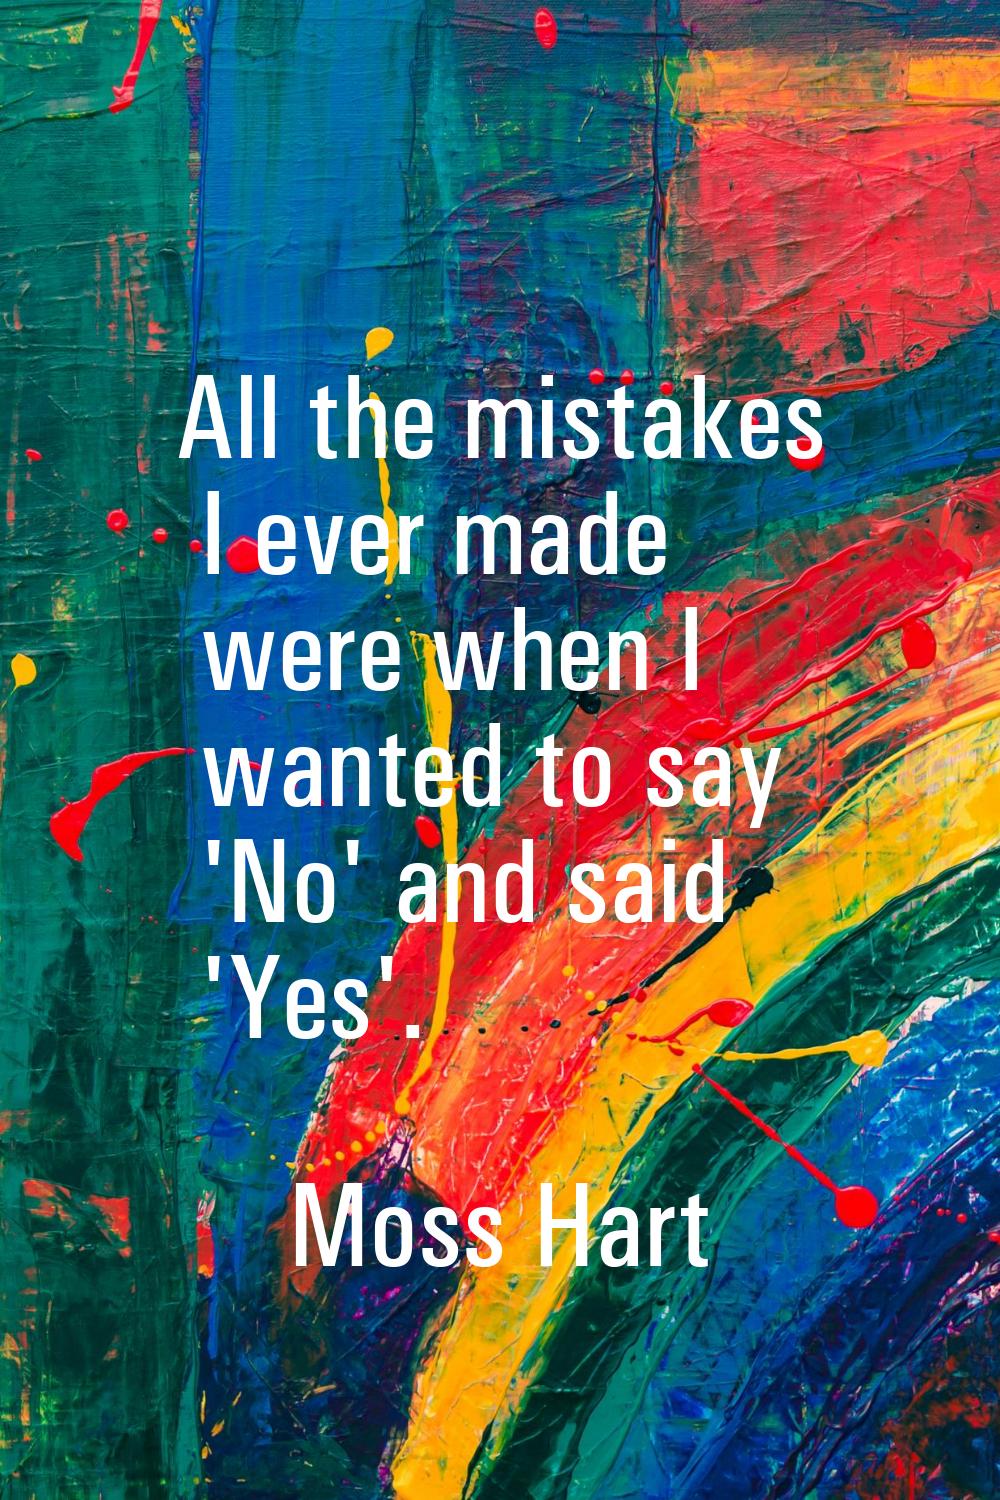 All the mistakes I ever made were when I wanted to say 'No' and said 'Yes'.